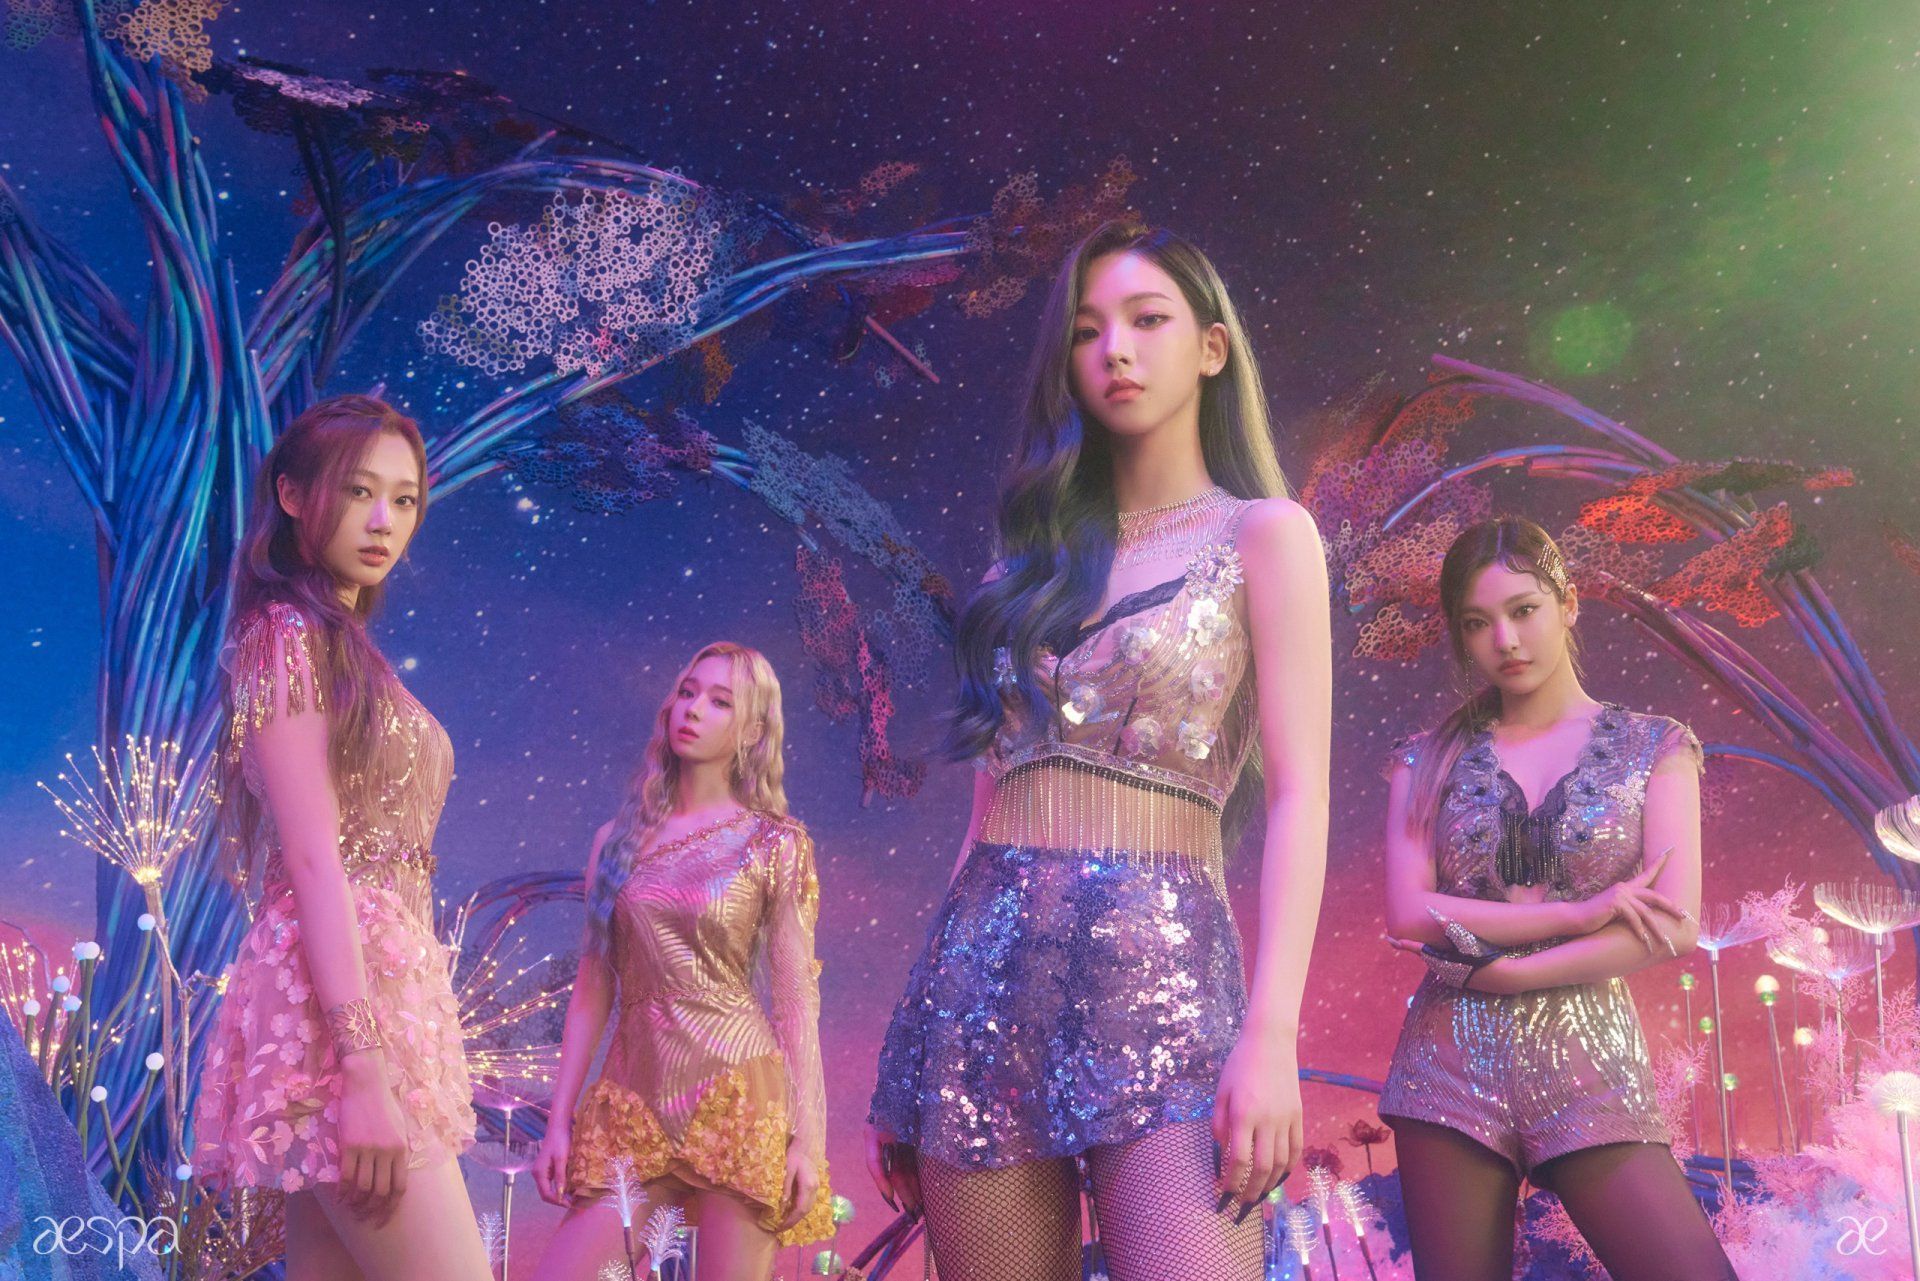 The members of ITZY, a K-Pop group, stand in front of a colorful background. - Aespa